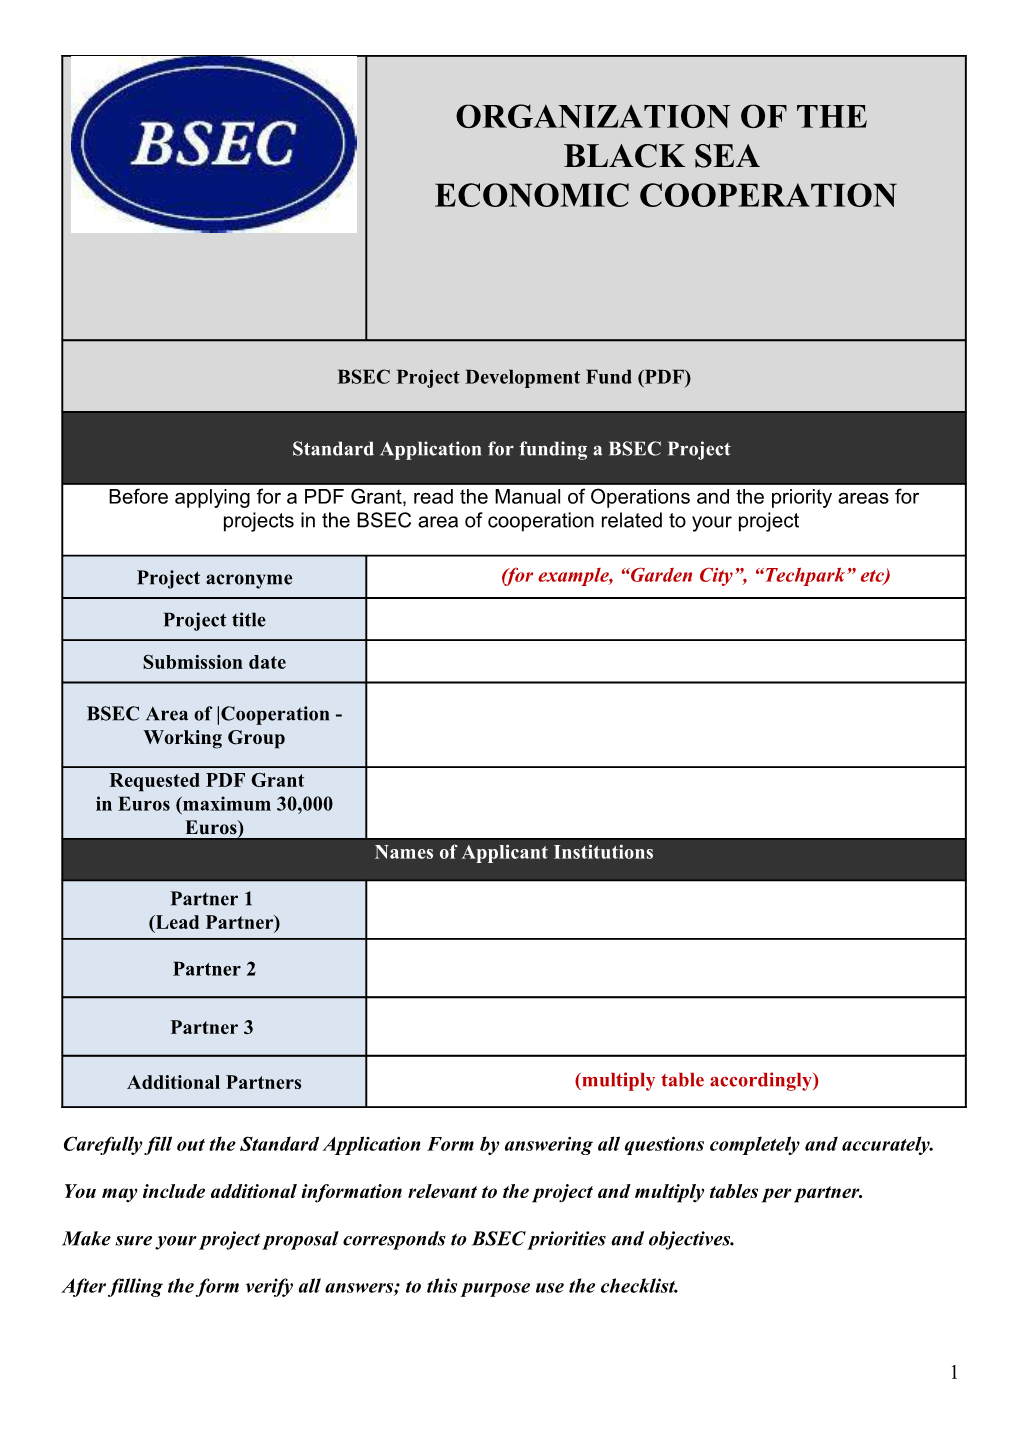 Proposal for a New PDF Application Form